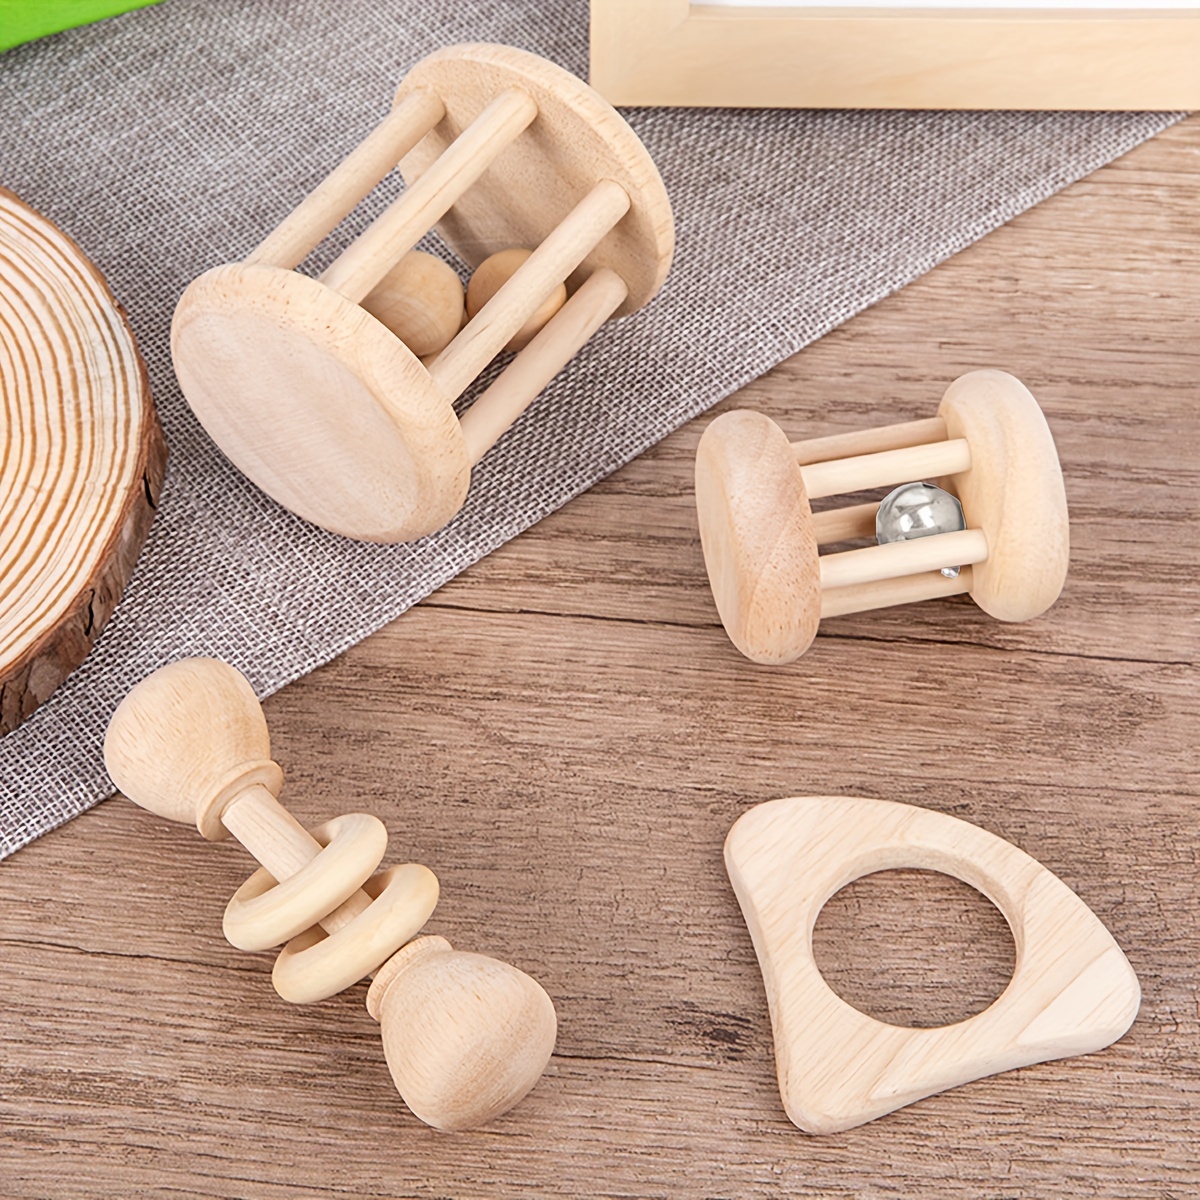 Wooden Baby toys set, Wood N Toys